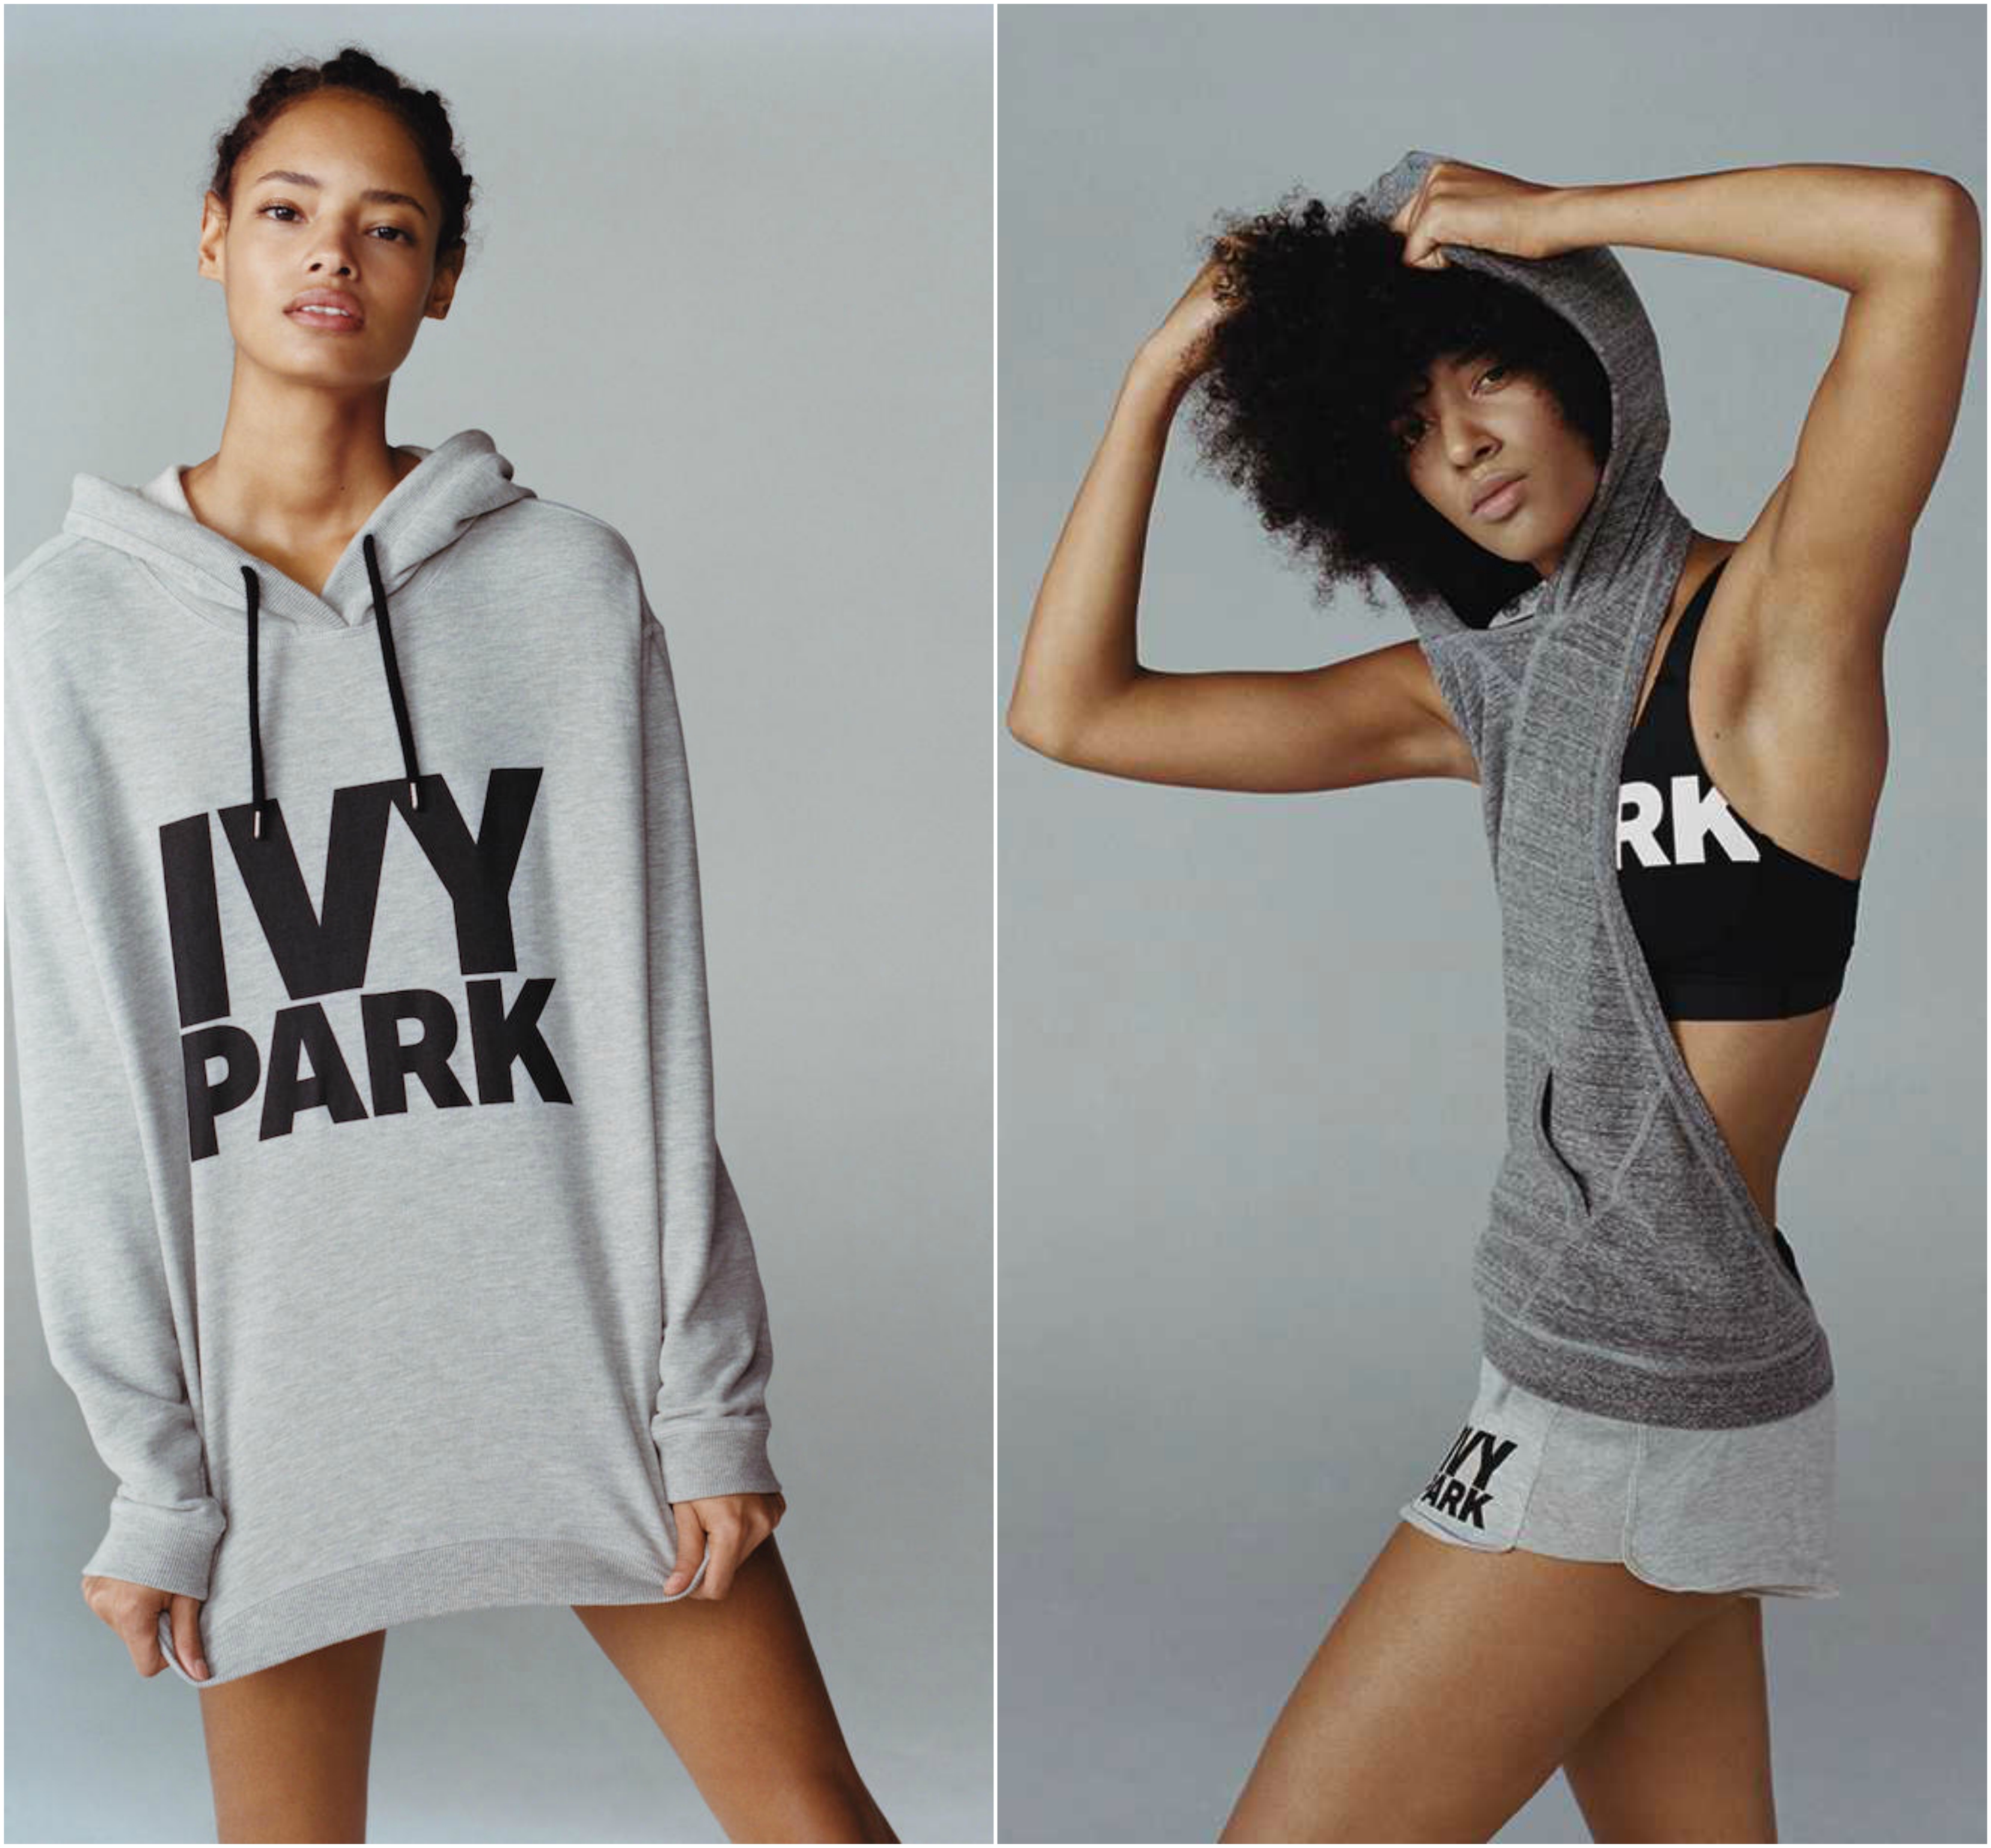 IVY PARK REVEALED & RELEASED | THE UNTITLED MAGAZINE